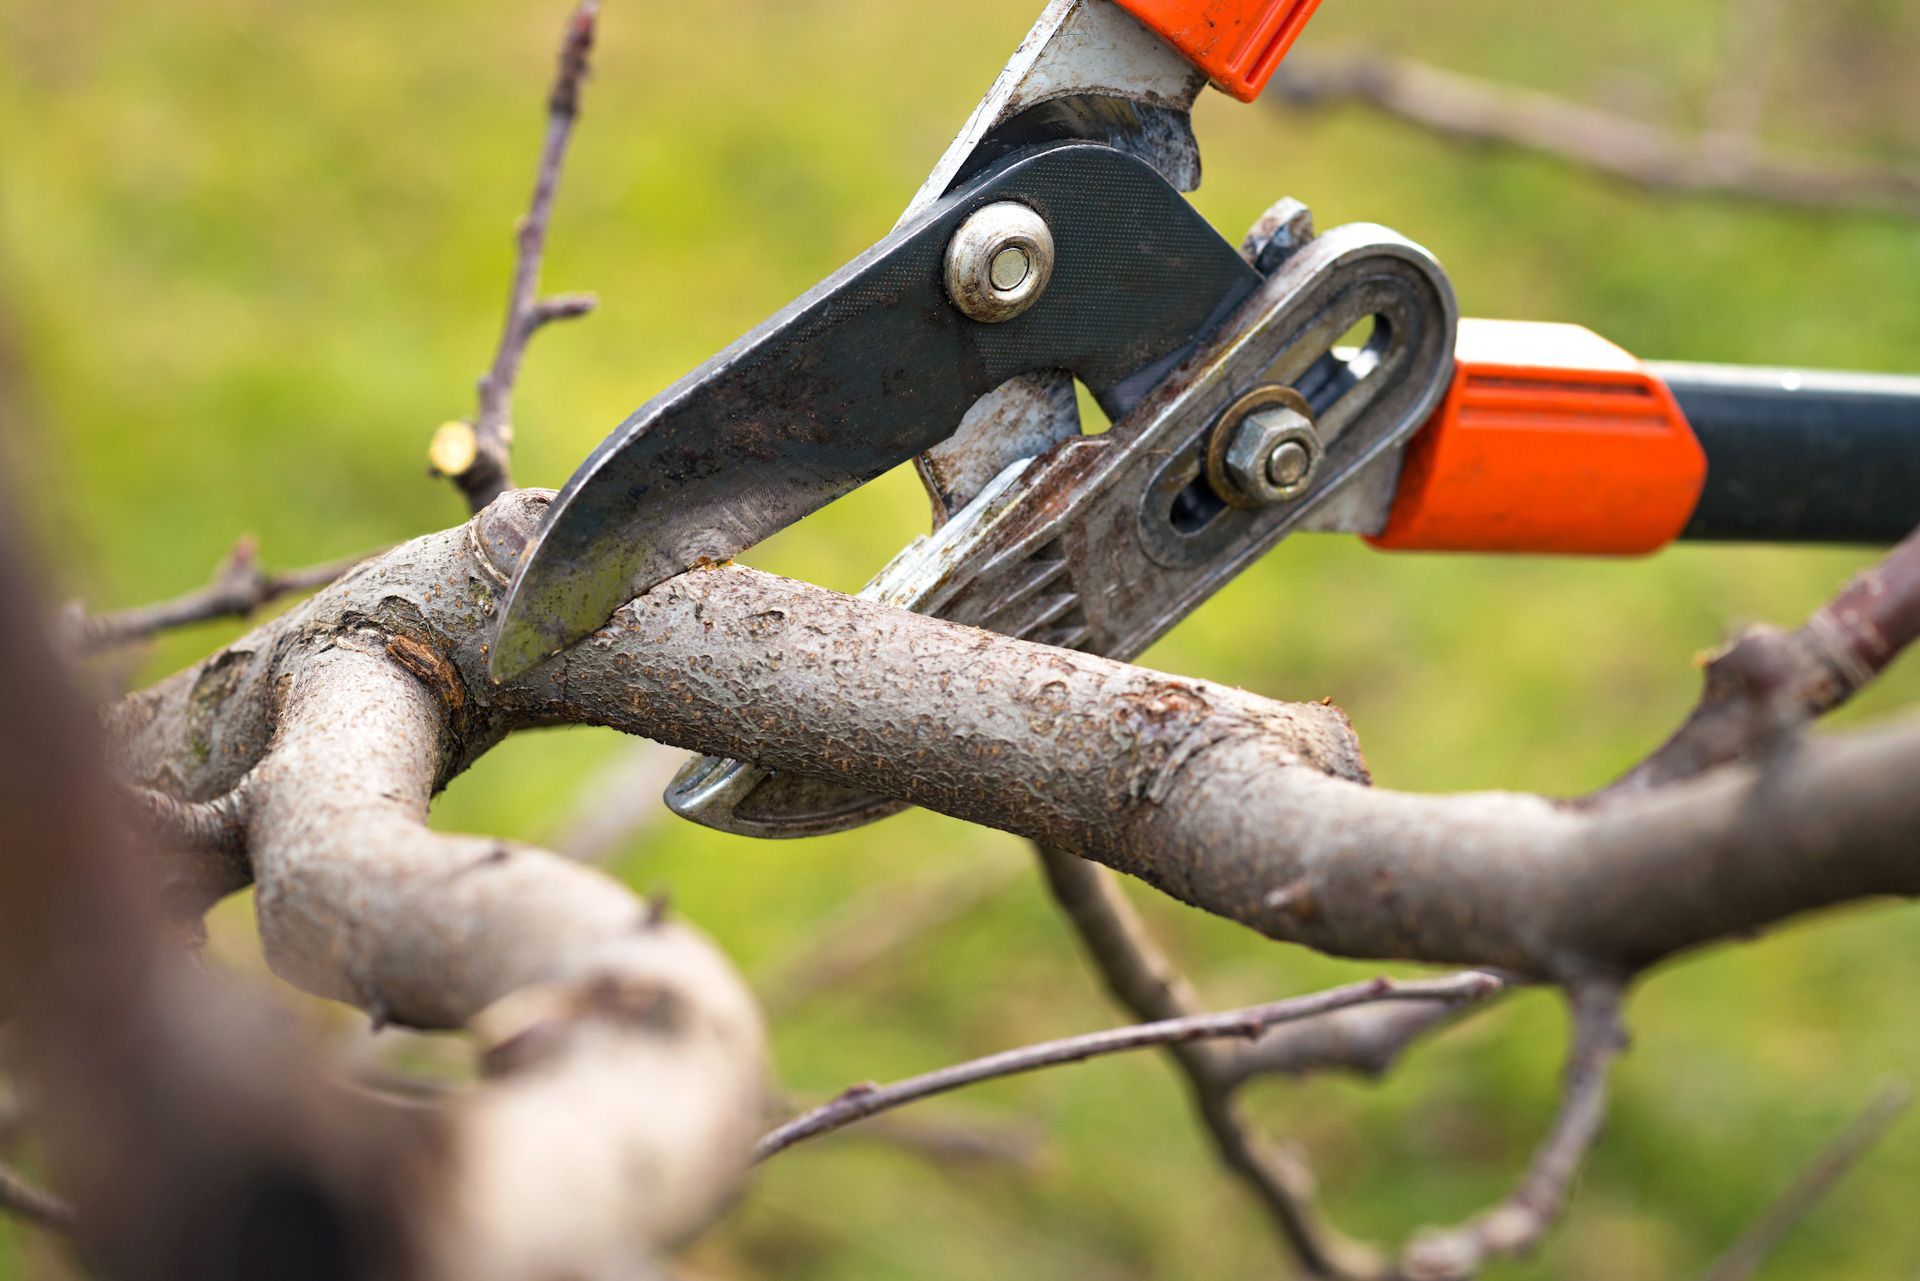 A person is cutting a tree branch with a pair of scissors